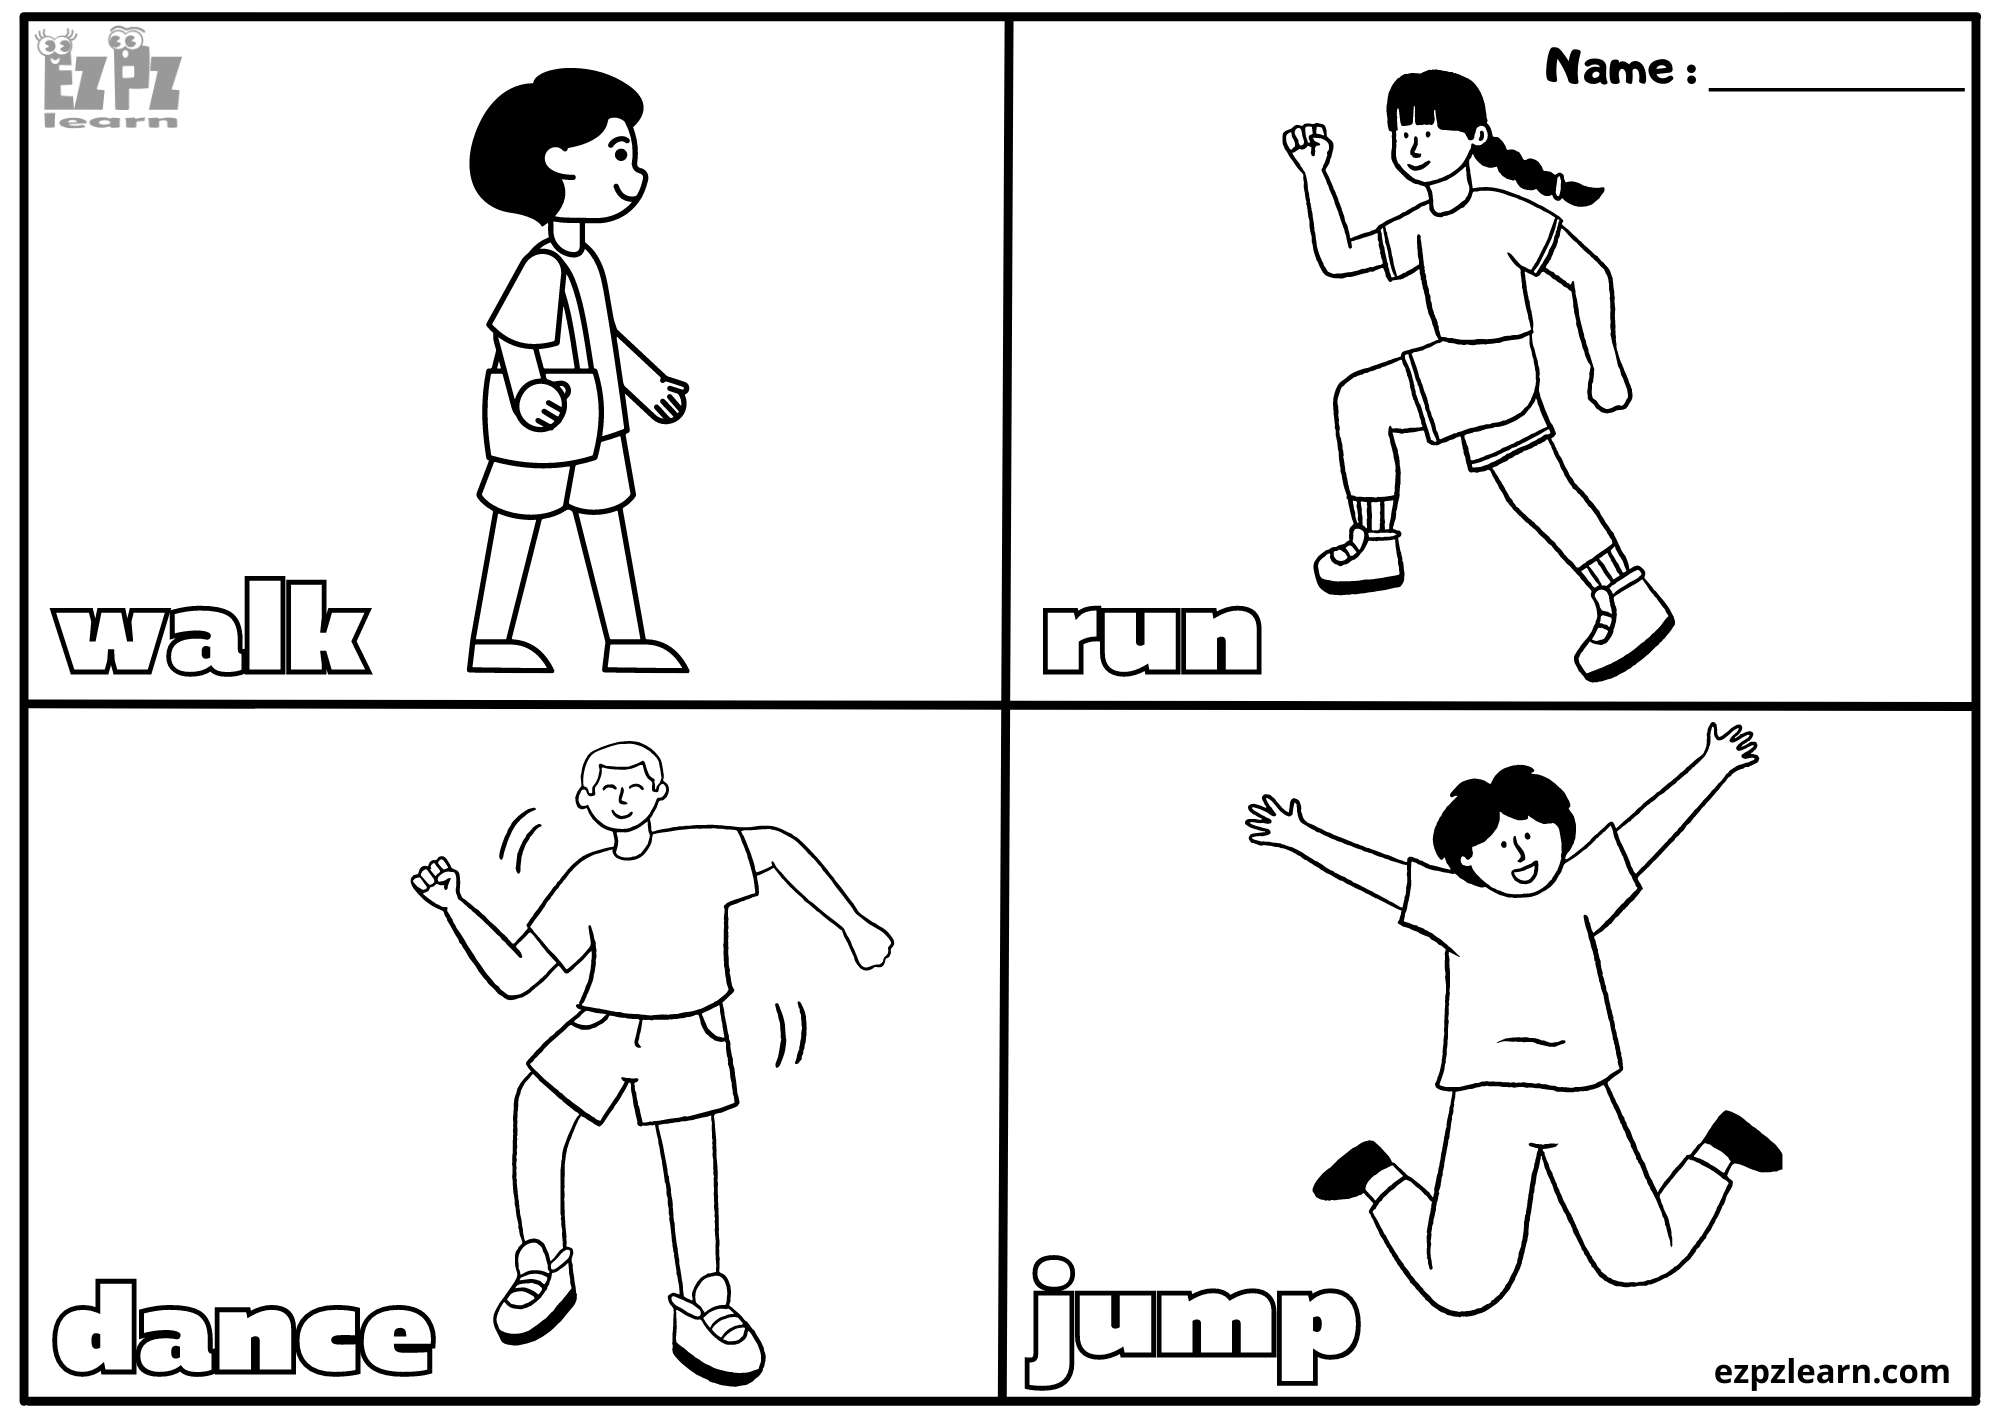 action-verbs2-coloring-pages-free-pdf-download-ezpzlearn